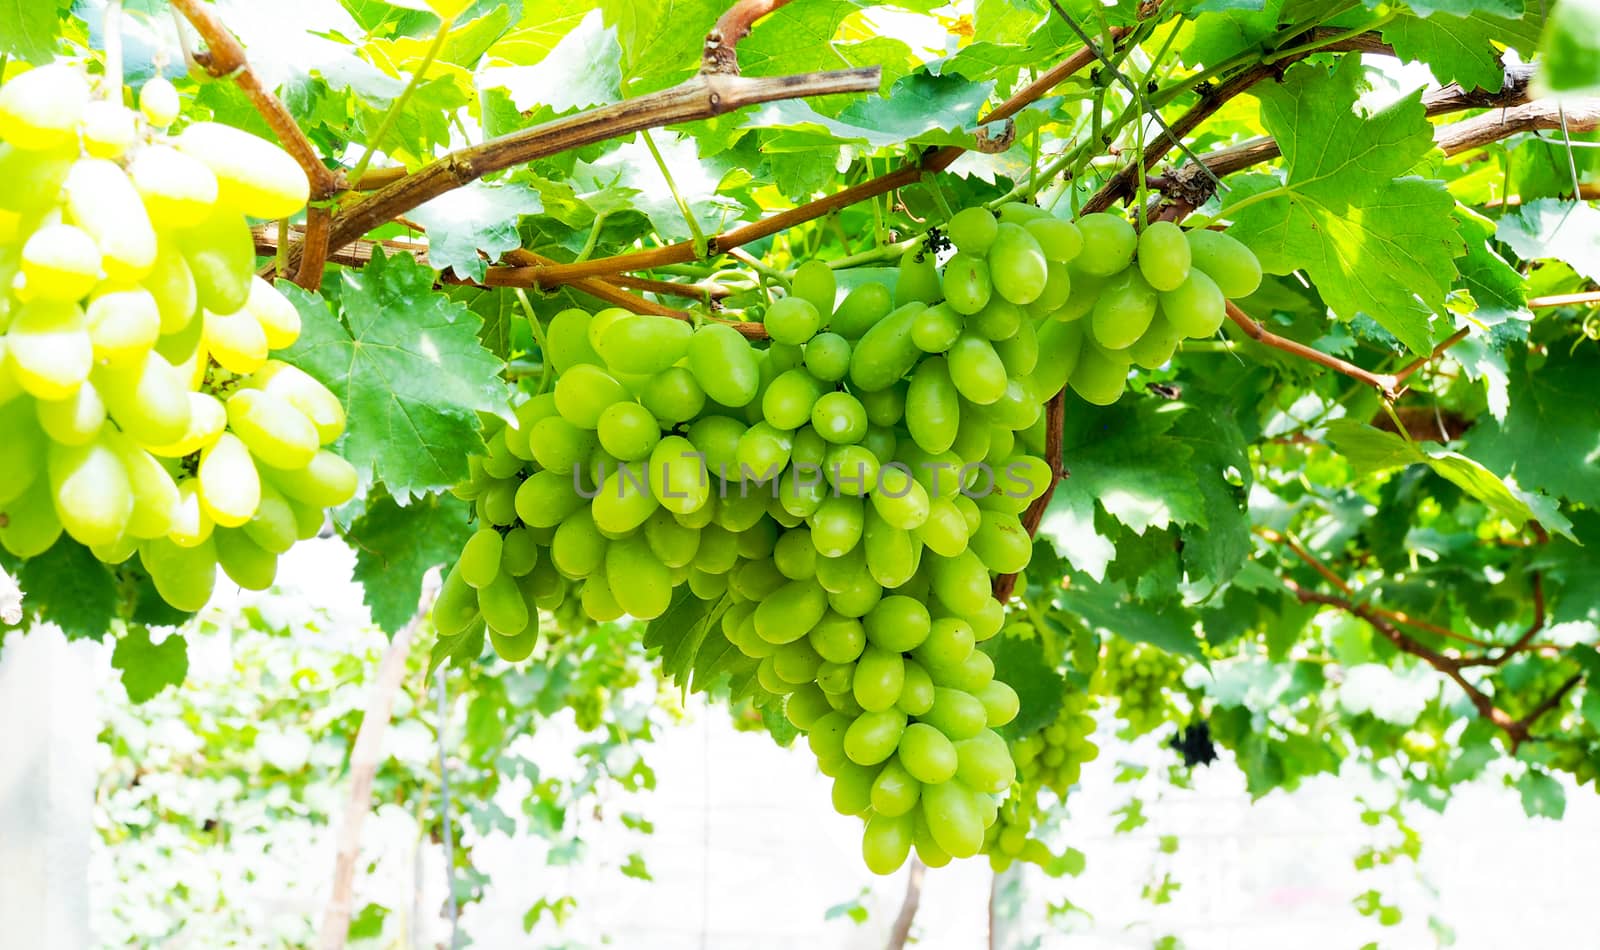 Bunches of green grapes in vineyard. by kittima05